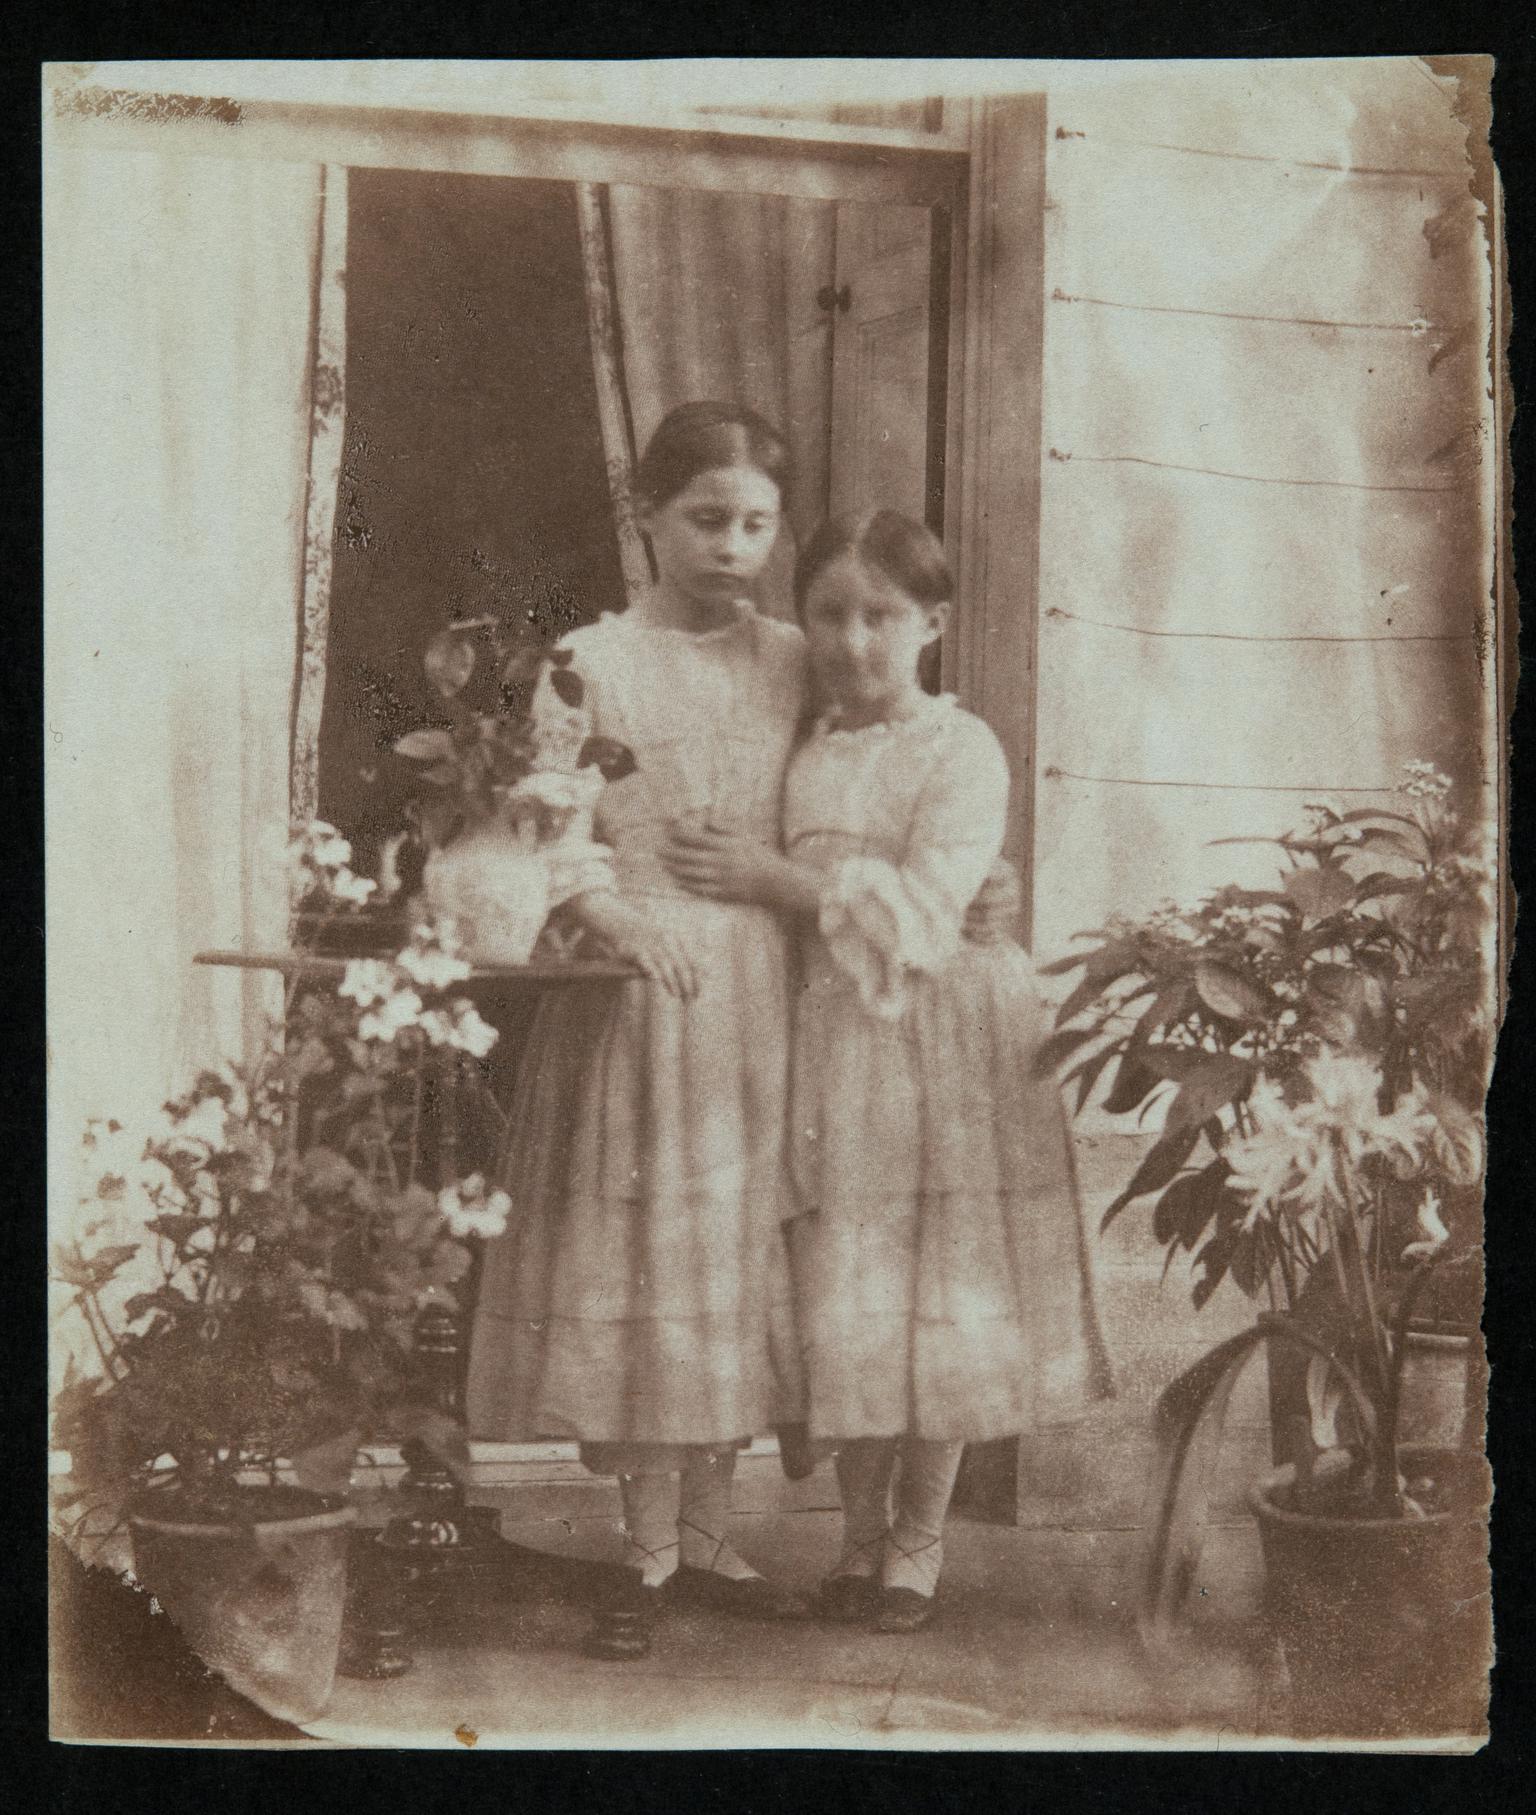 Elinor and Lucy Llewelyn, photograph